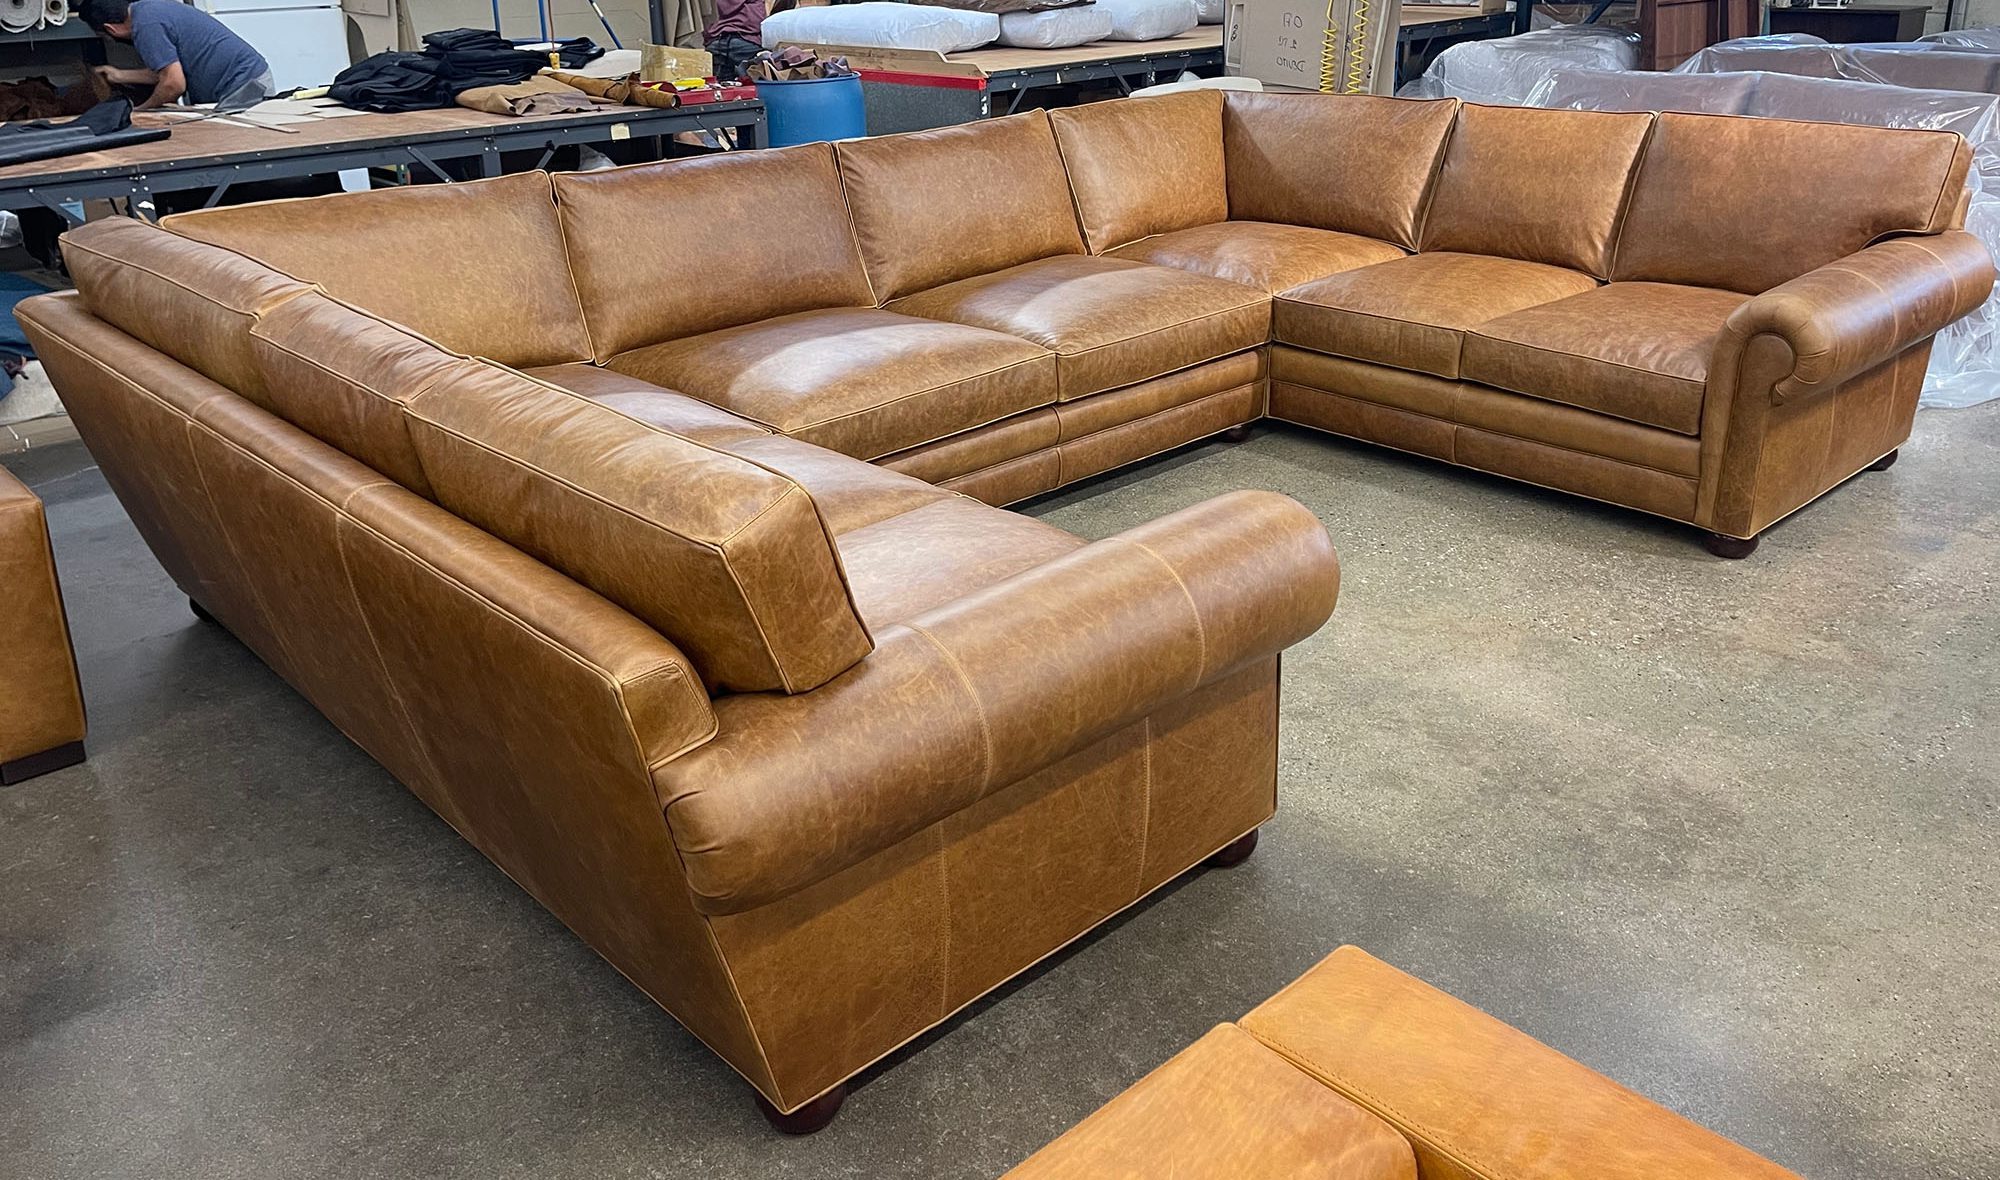 Langston U Sectional Sofa in Berkshire Chestnut leather - Size Option 2 - 48 inch depth - LAF front angle